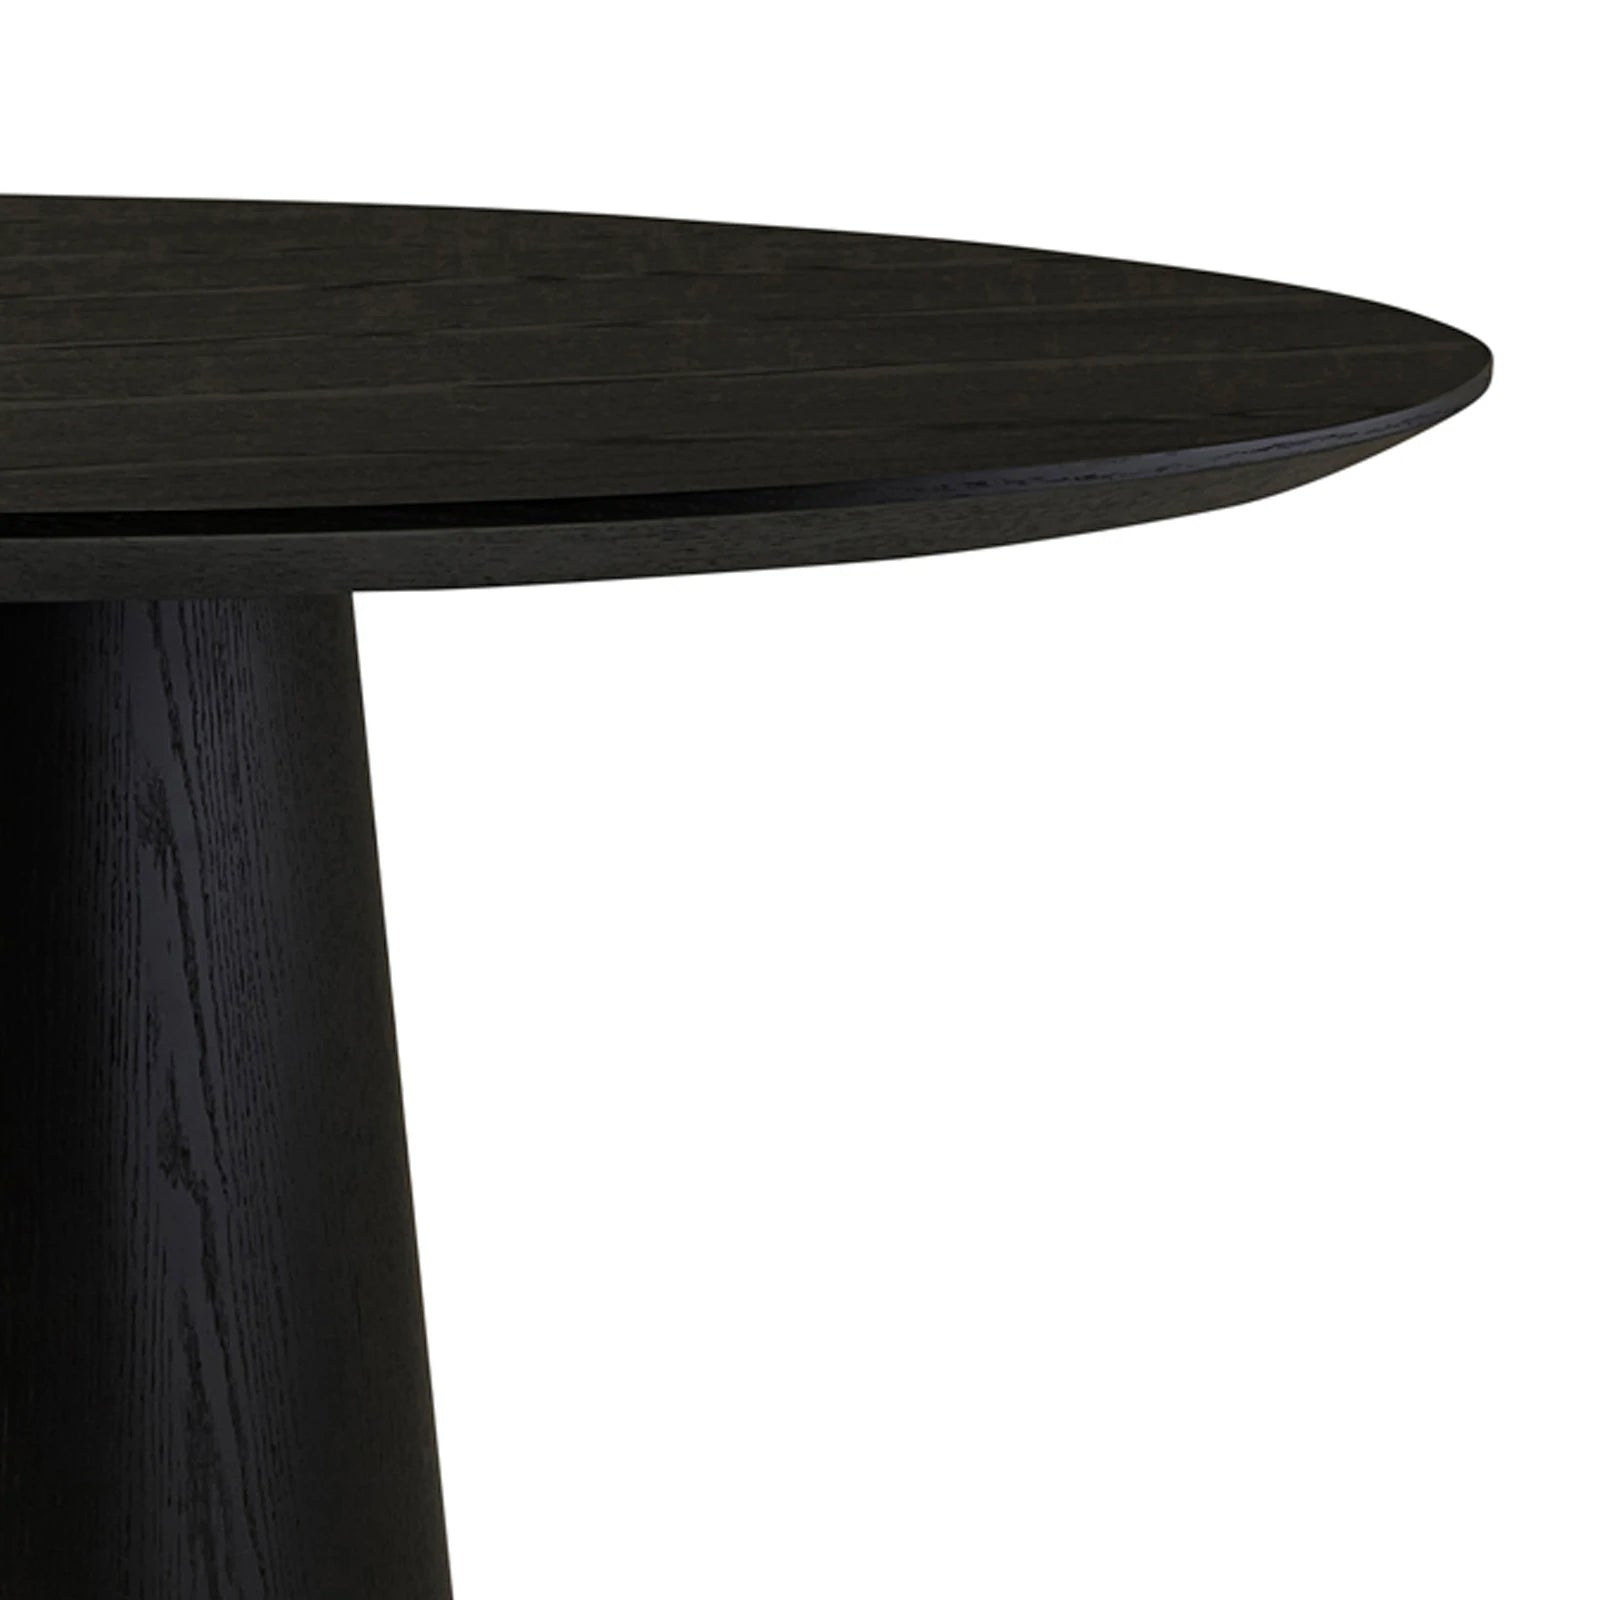 Dida Oval Dining Table - Small